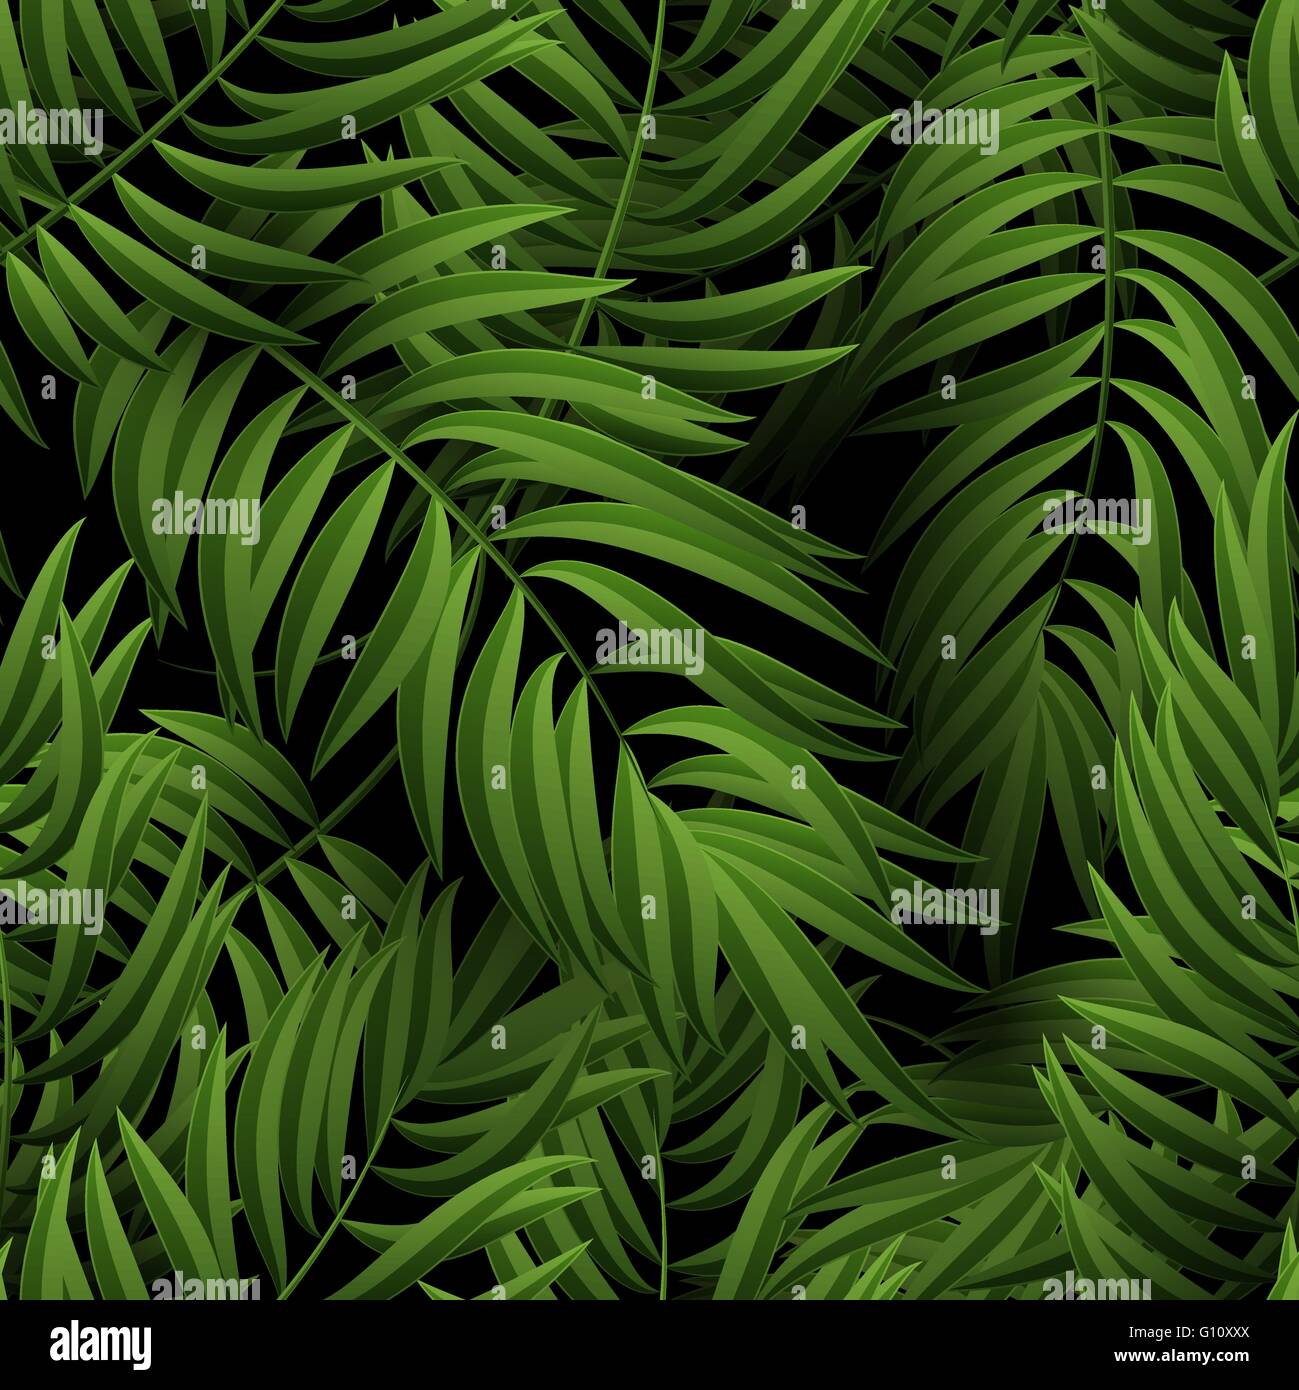 Seamless tropical jungle floral pattern with palm fronds. Vector illustration. Green Palm leaves pattern on black background Stock Vector